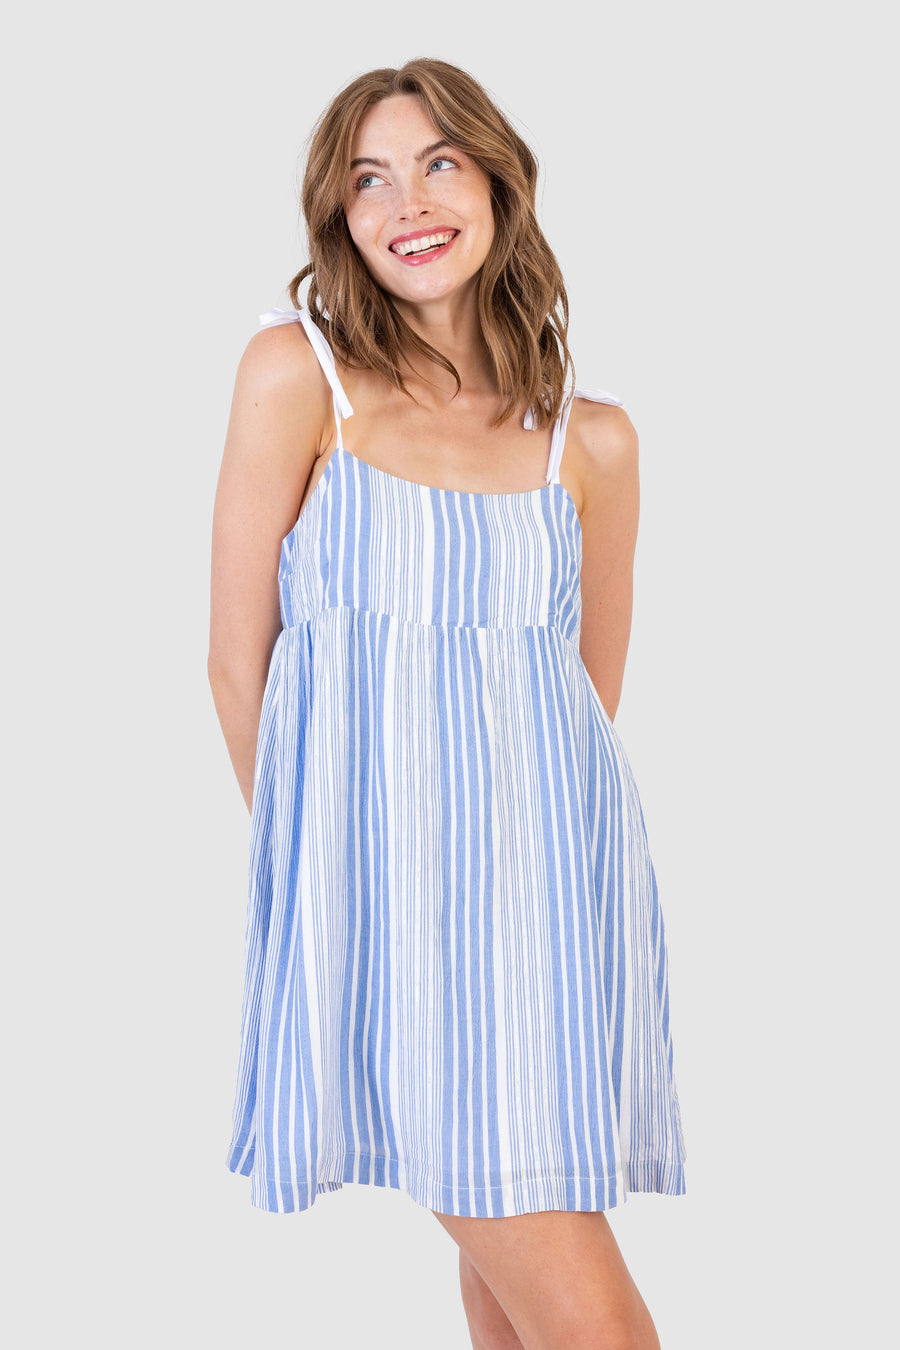 Alexis Dress Cabo Stripe *Limited*Edition*